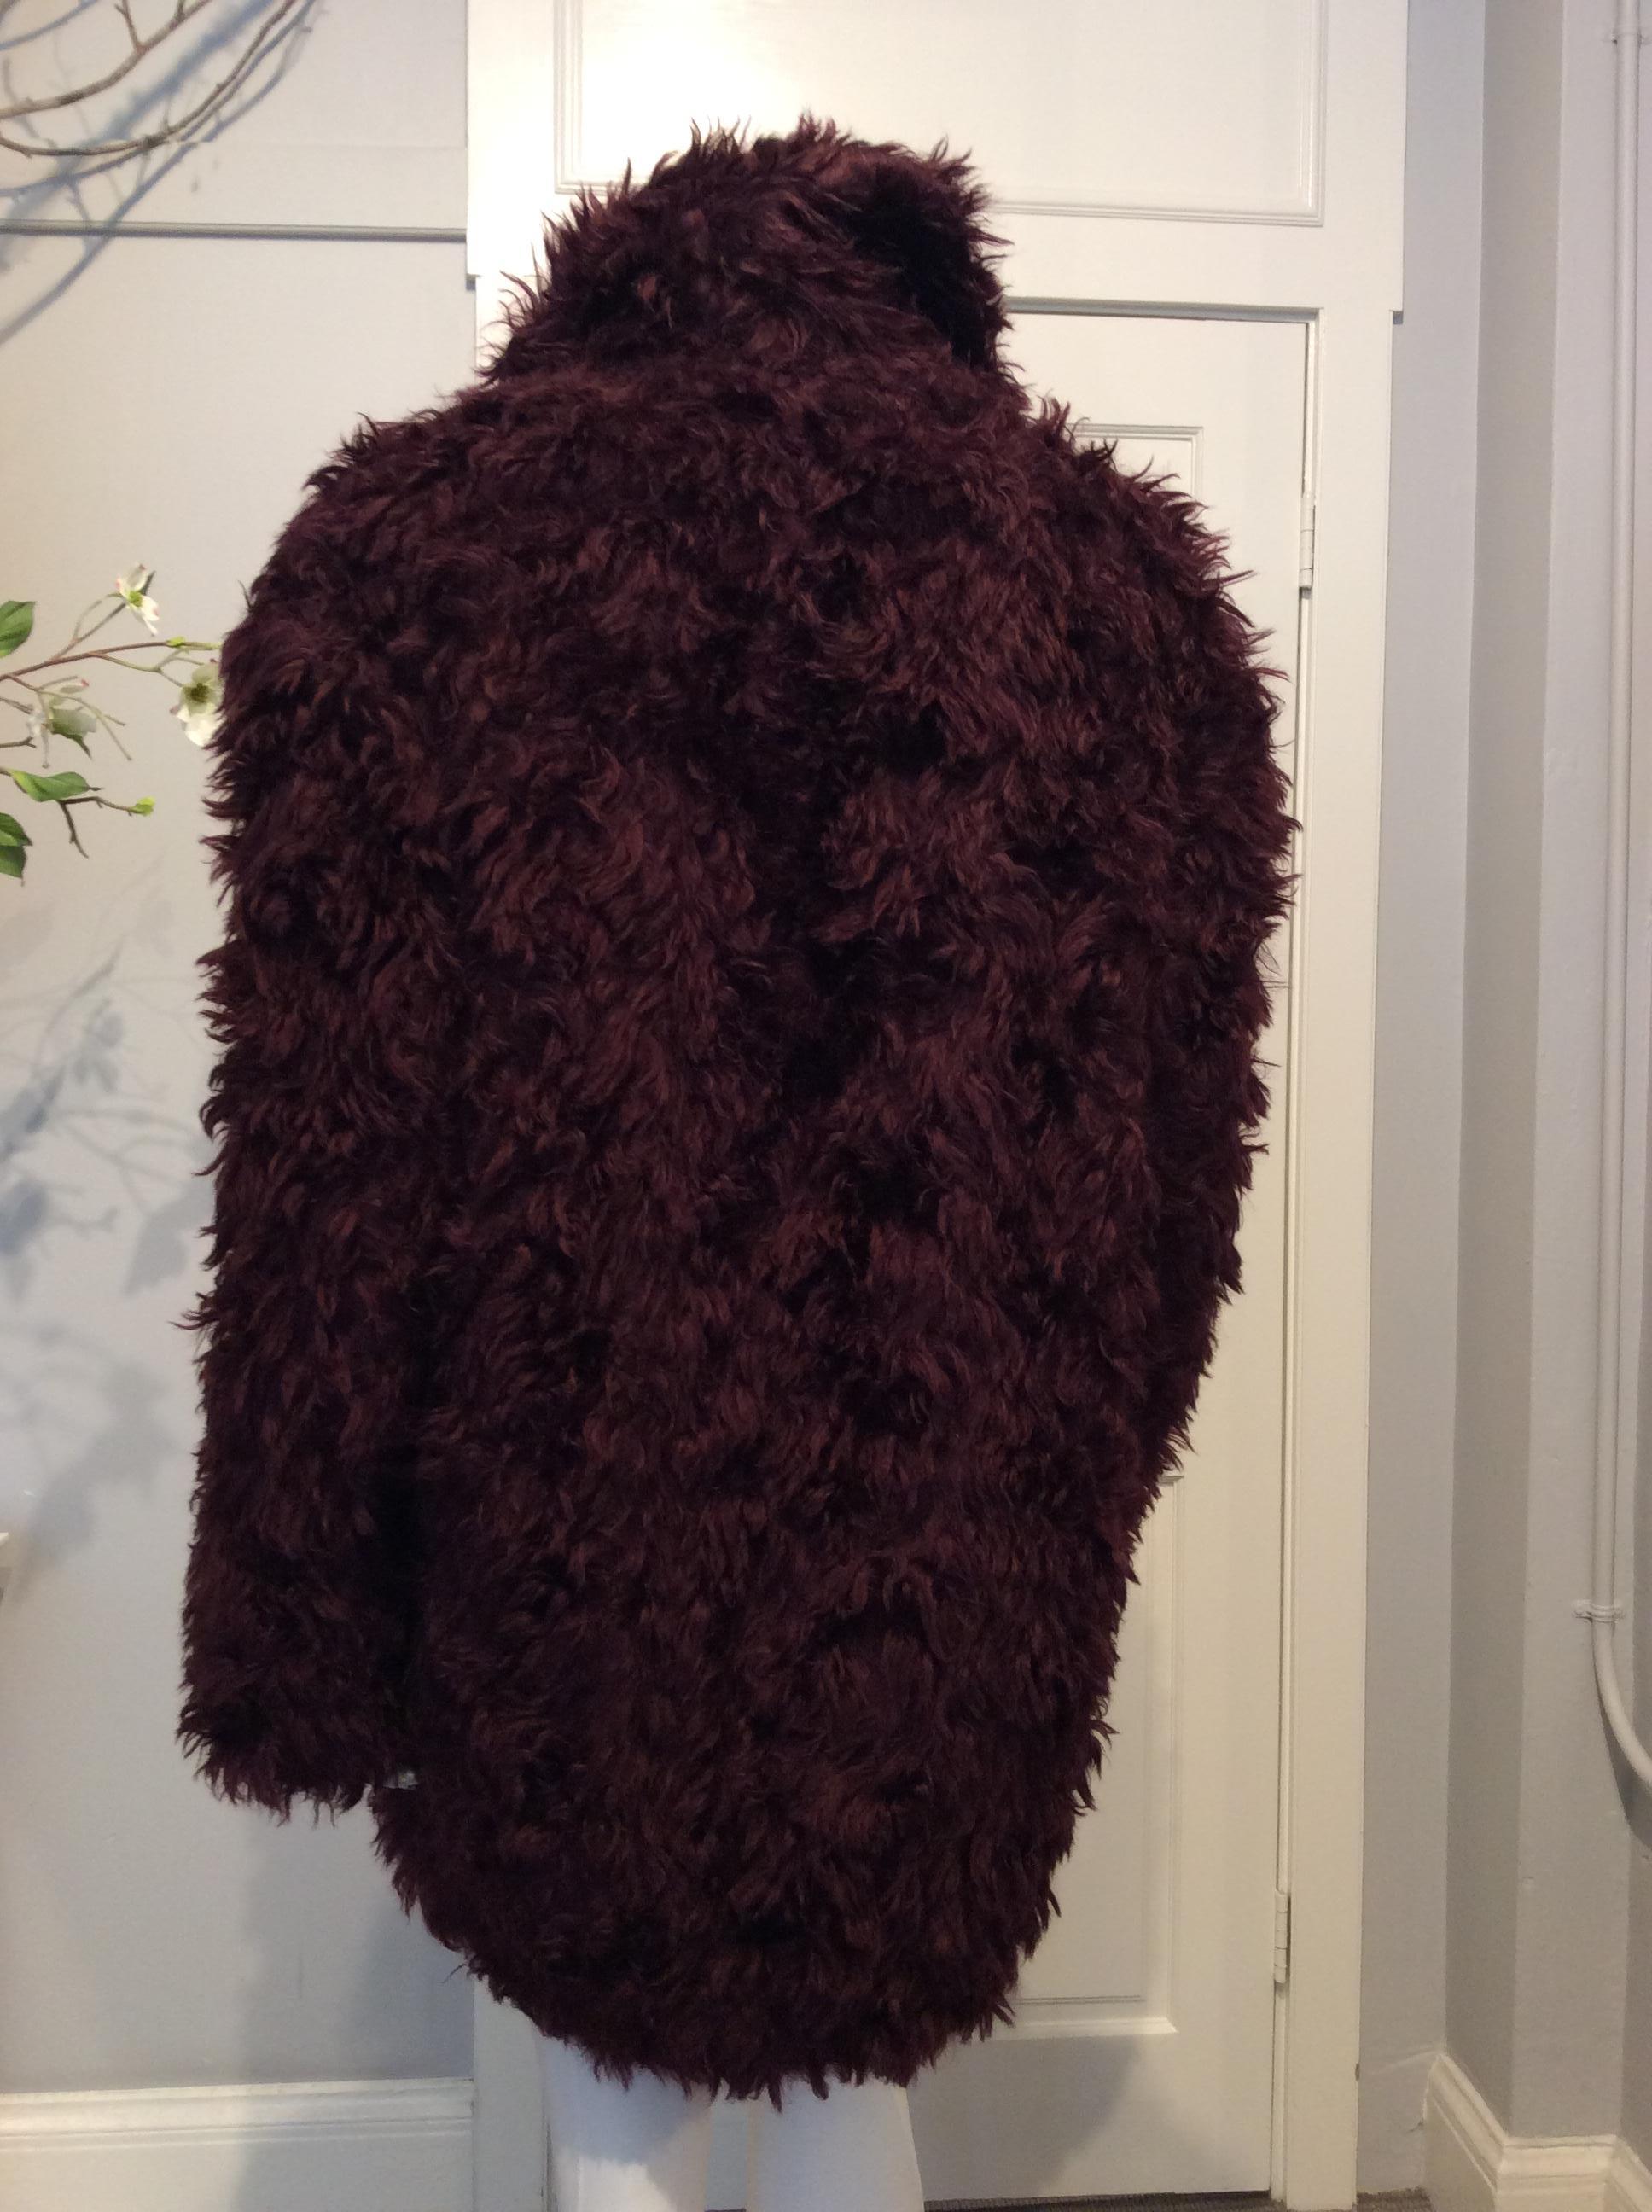 Artisanal Maison Martin Margiela maroon angora double breasted coat with two seam pockets. Two additional inside breast pockets.
Fur origin South Africa. 
New with tags. 


